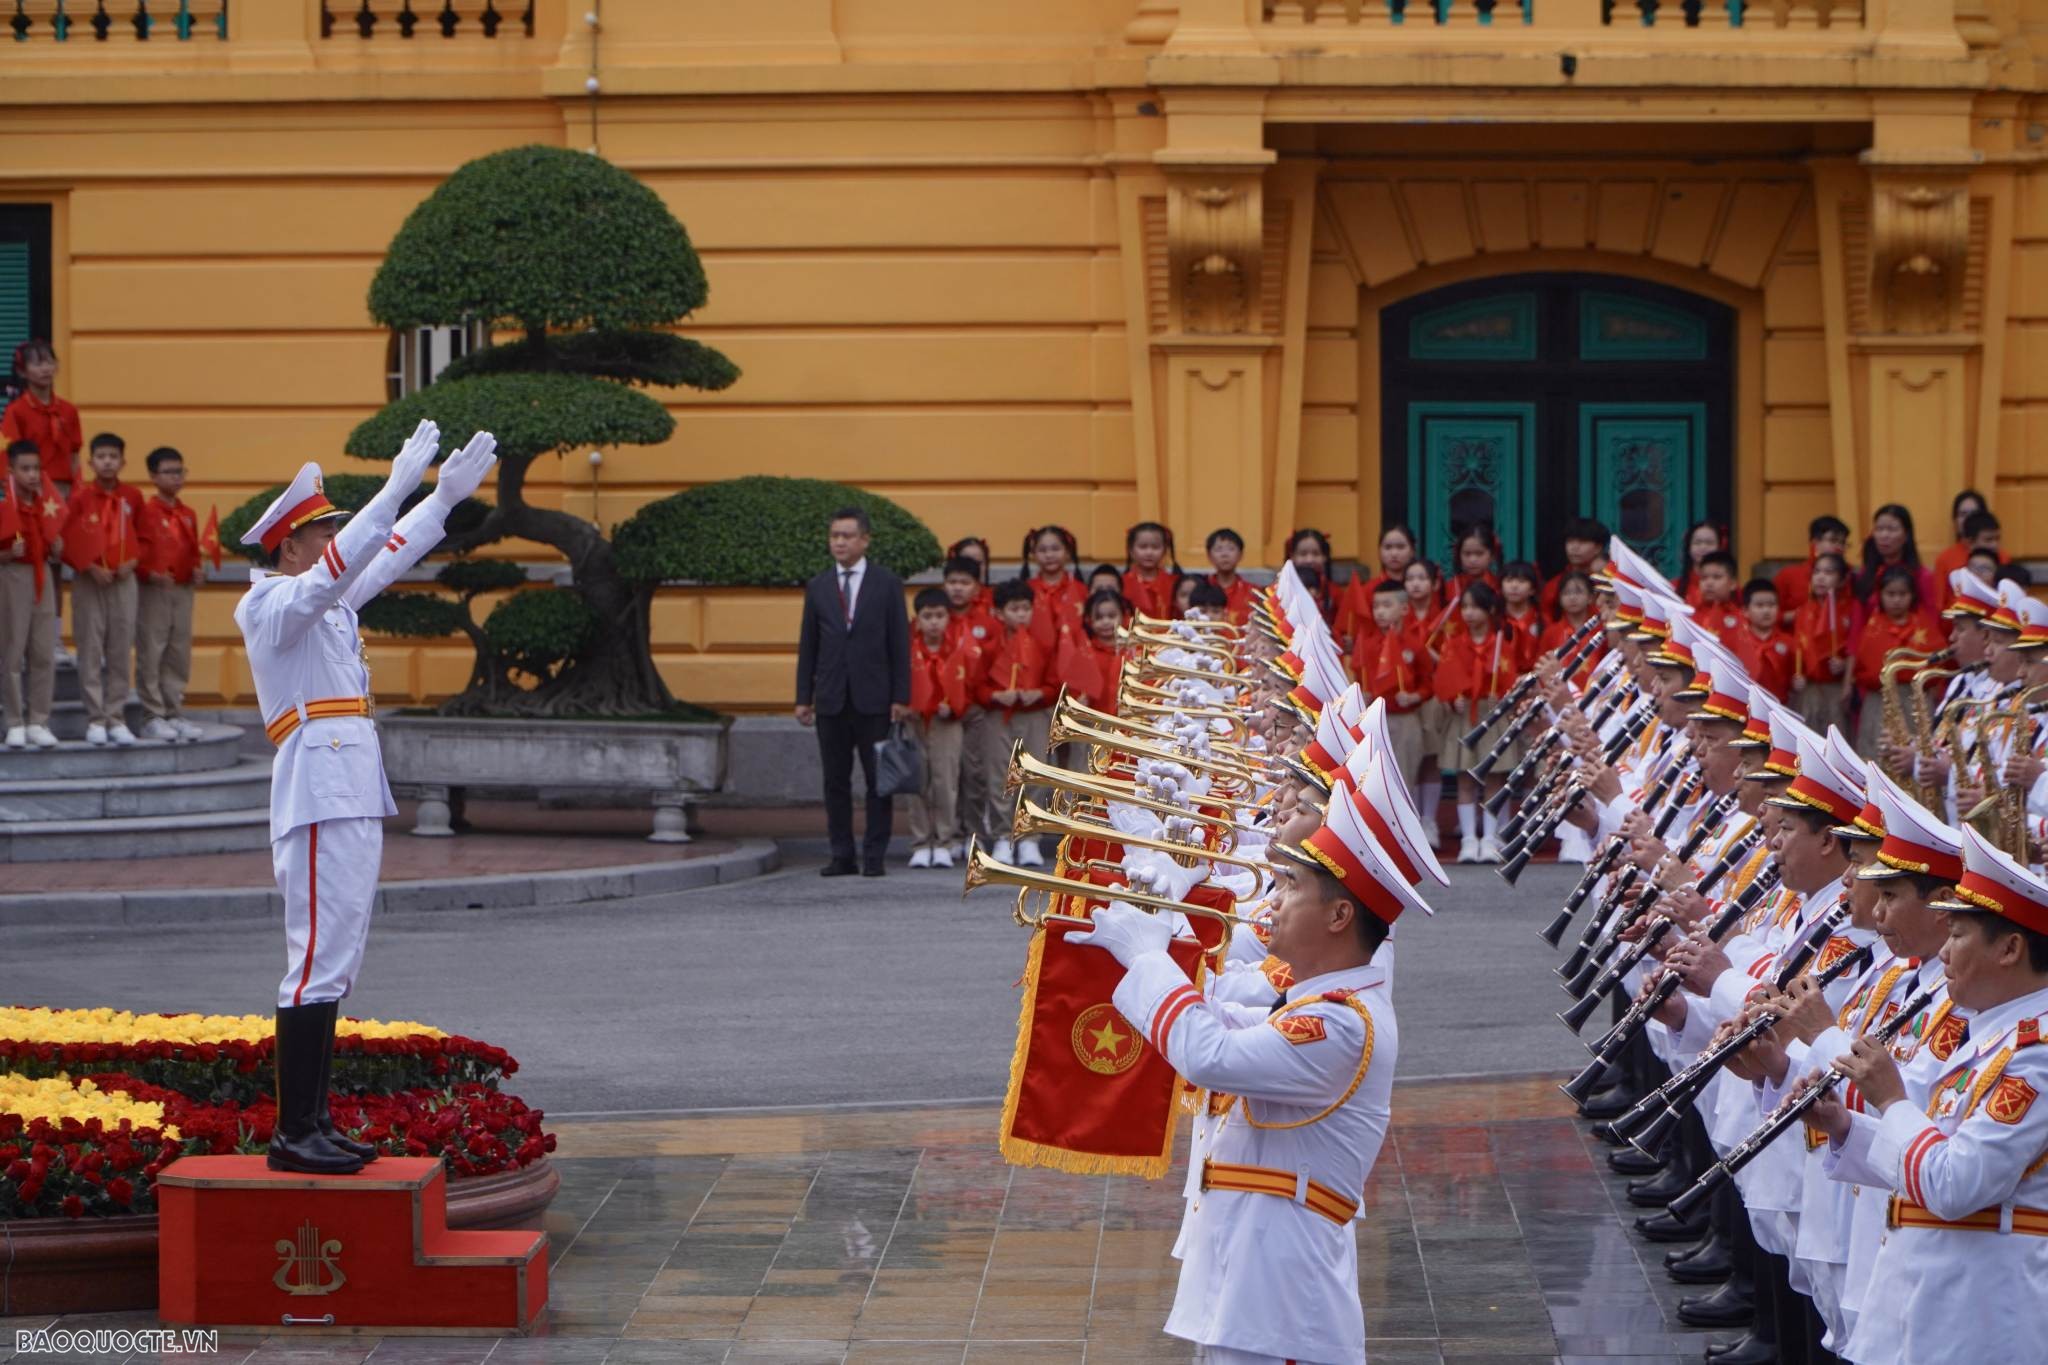 21-cannon salute to welcome General Secretary, President of China Xi Jinping in Hanoi